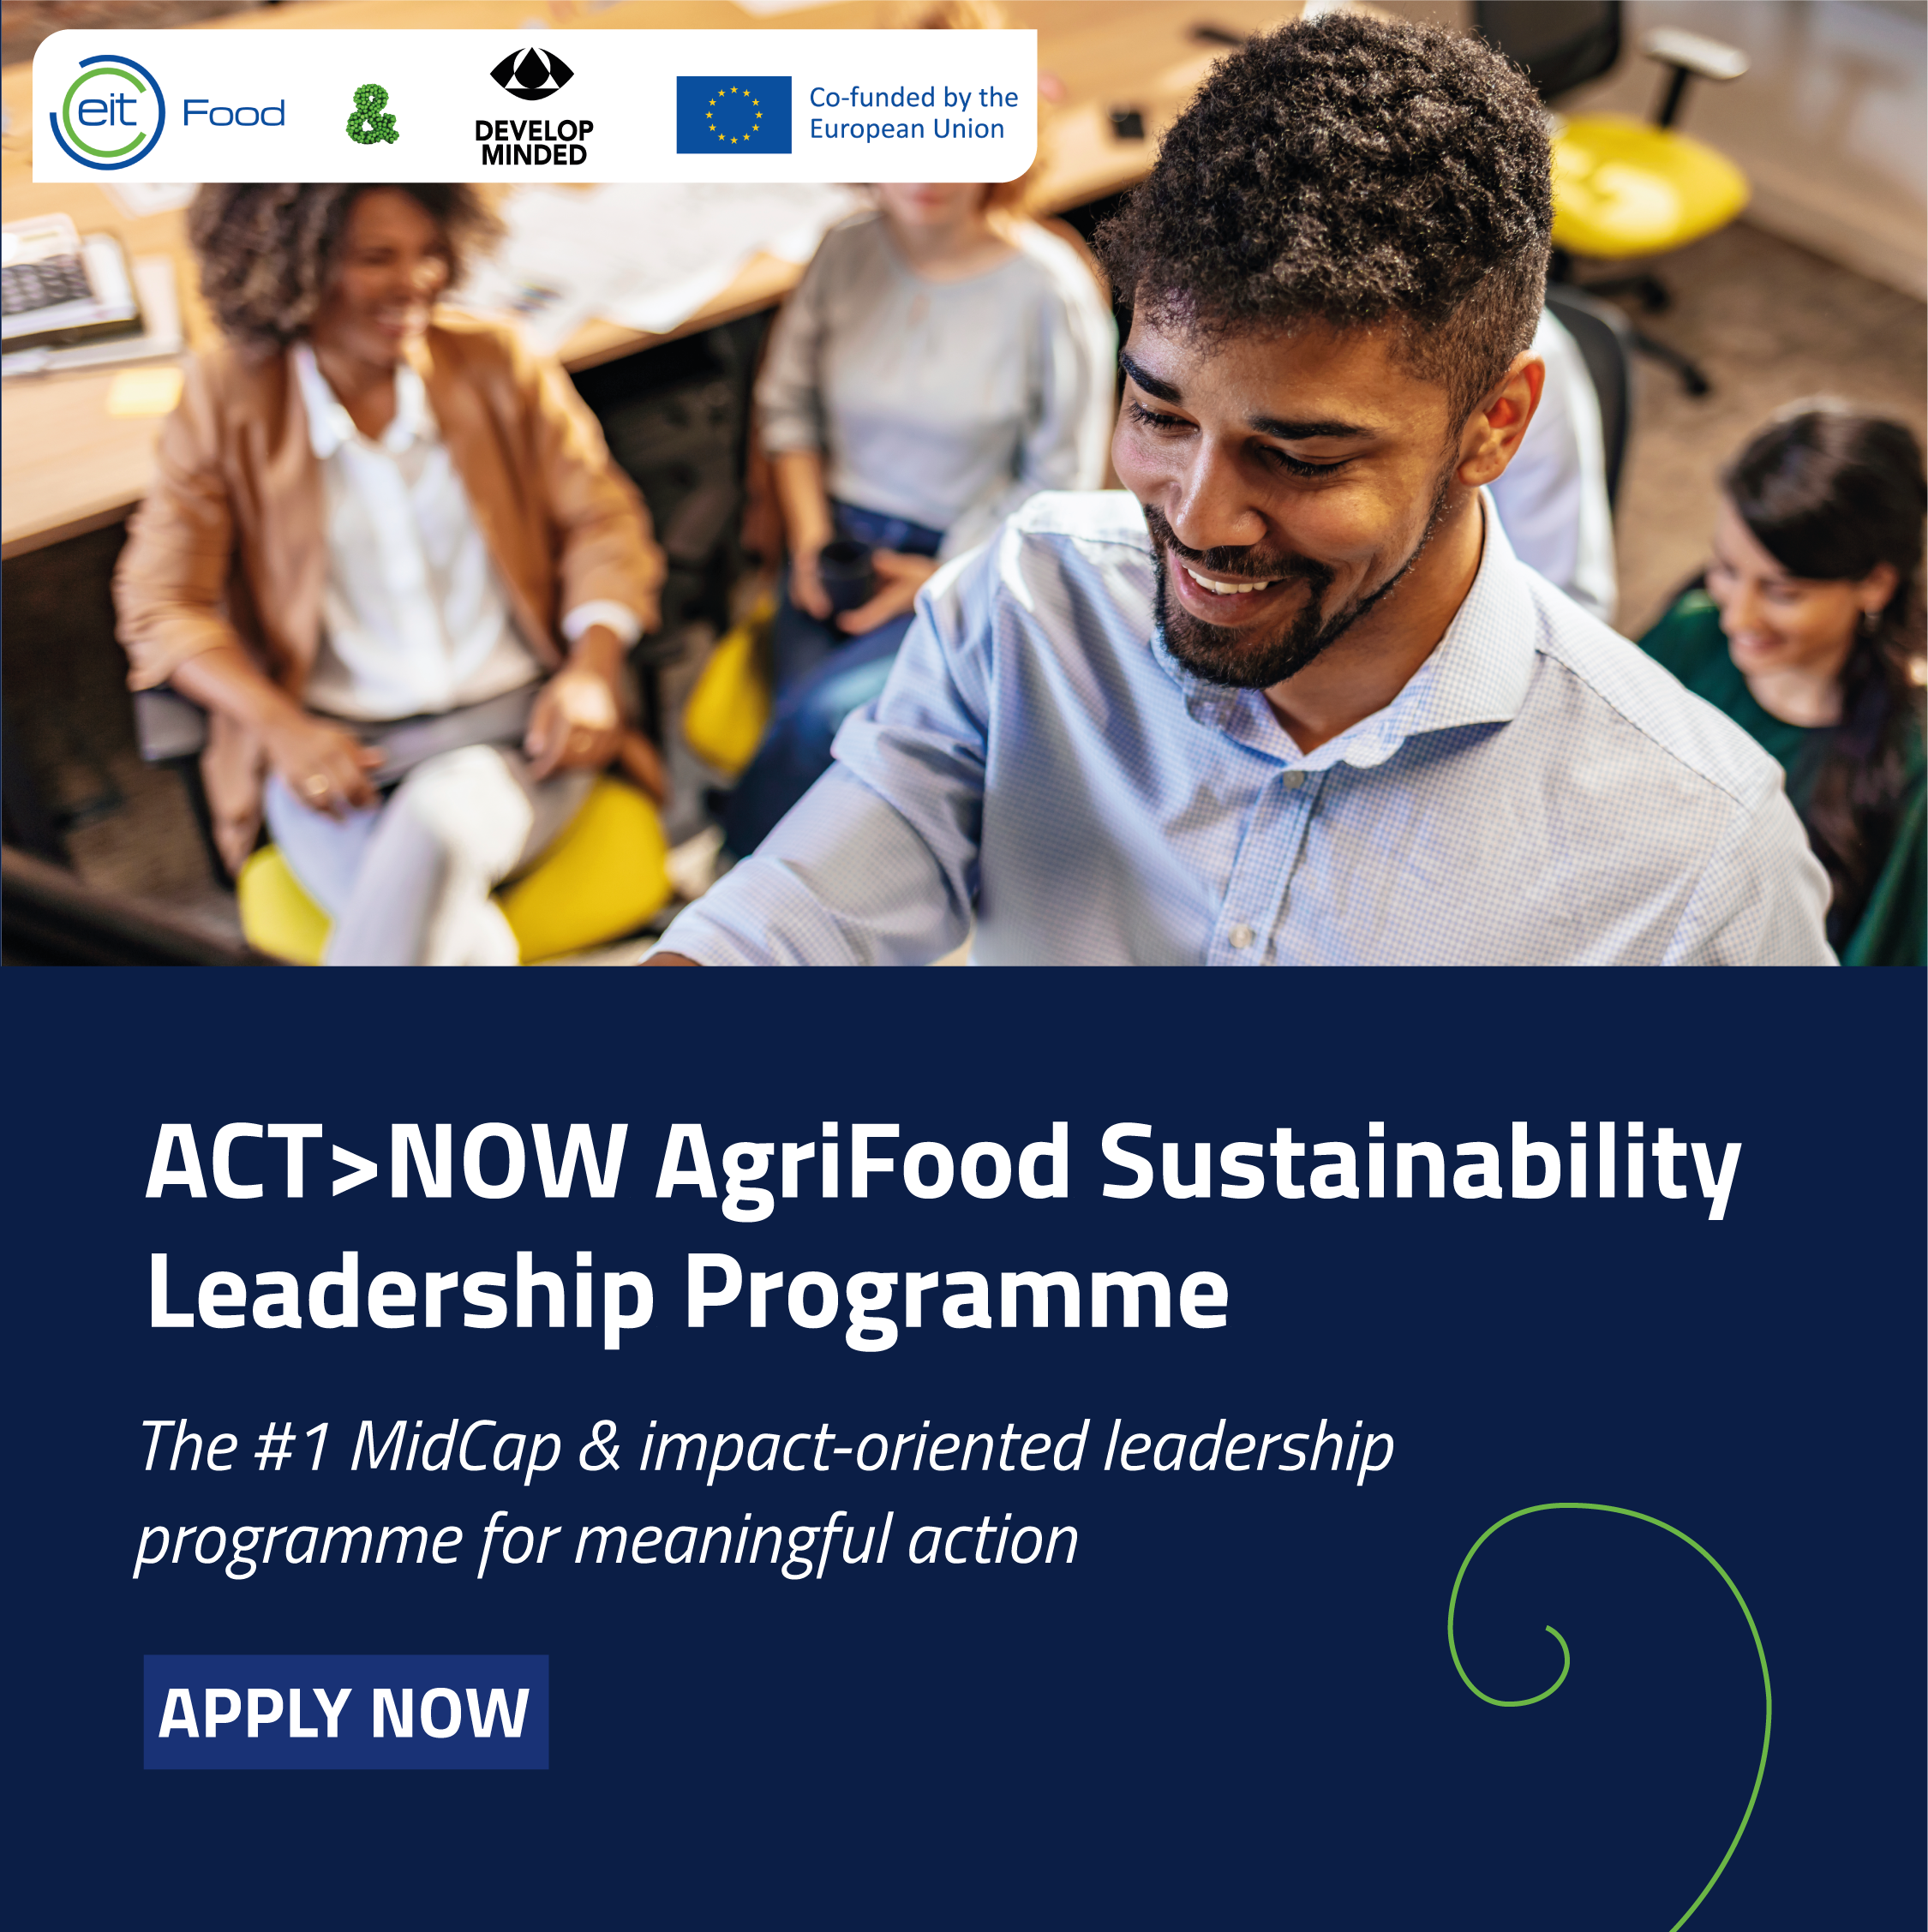 ACT>NOW Agrifood